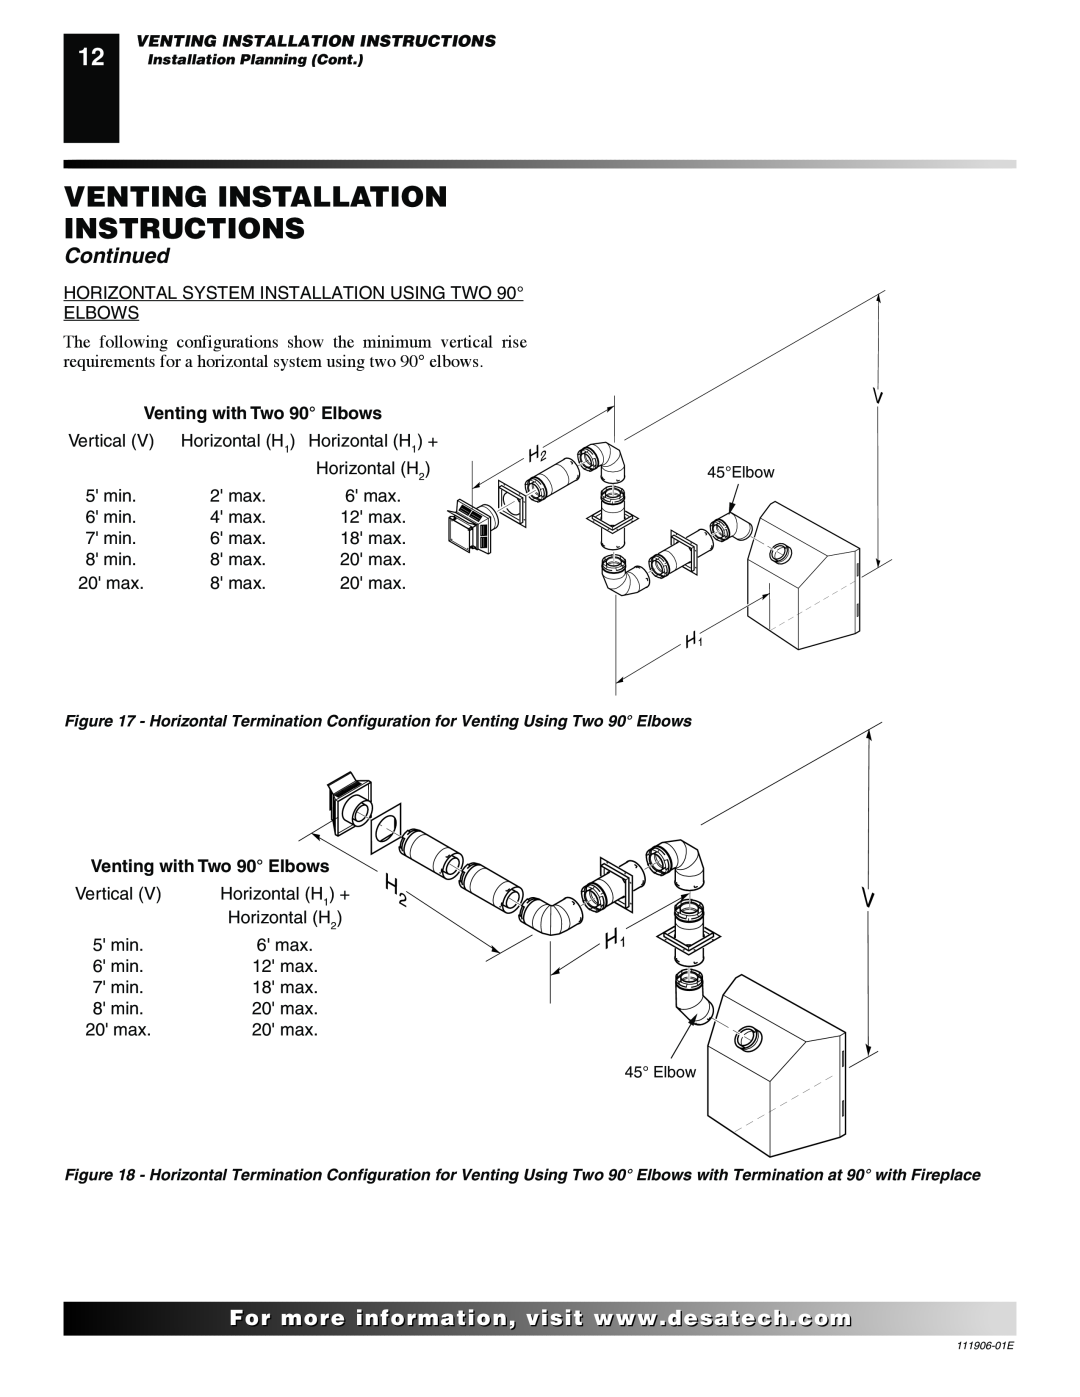 Desa V42N-A, CHDV42NR-B, V42P-A, VV42NB(1), VV42PB(1) Venting Installation Instructions, Continued, For..com, 45Elbow 